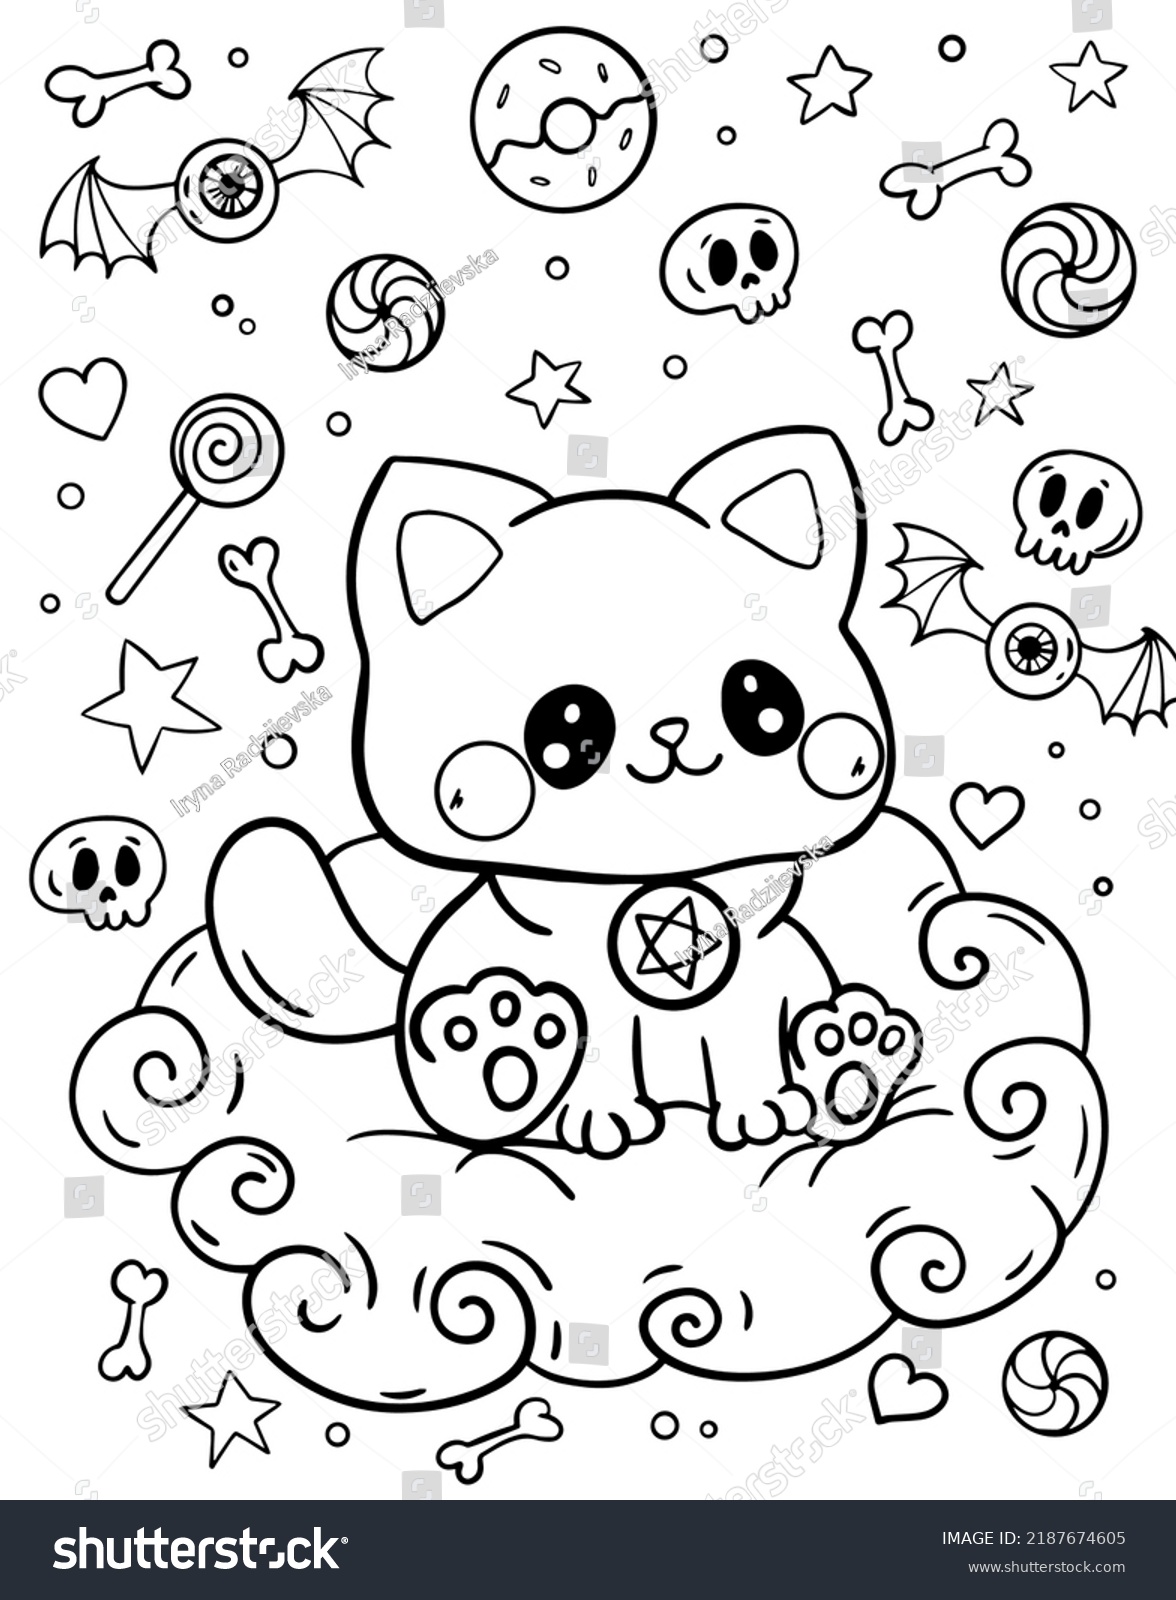 Kawaii coloring page cat sitting clouds stock vector royalty free